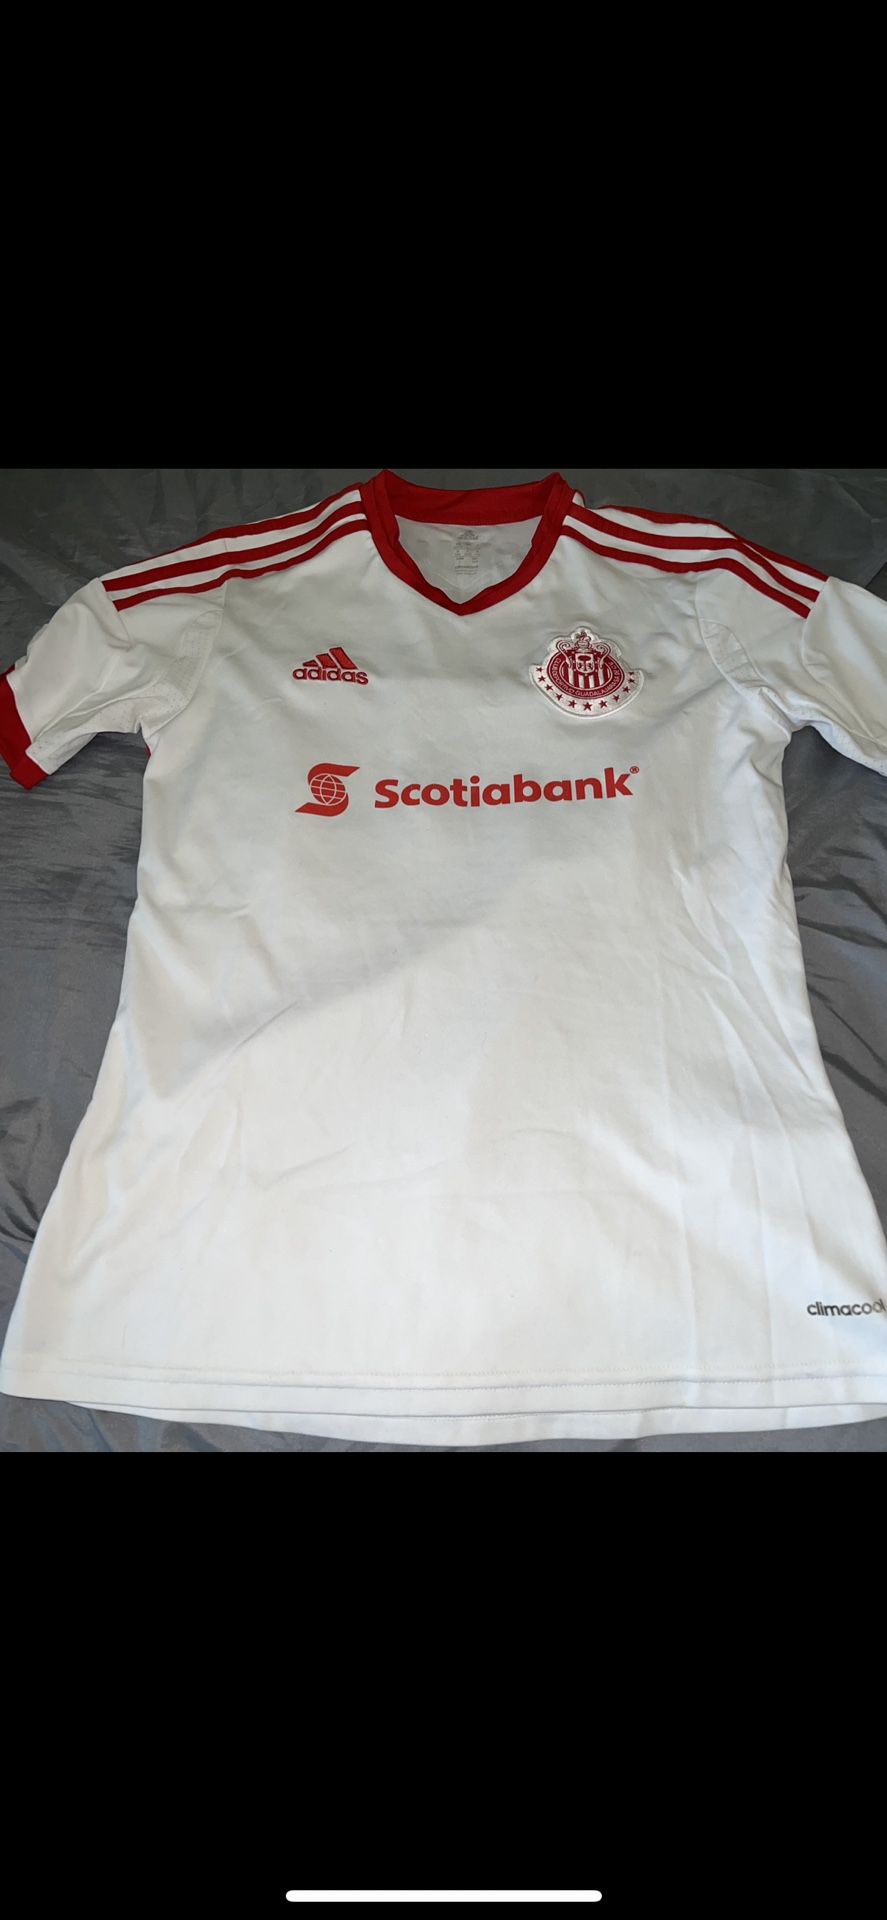 Chivas Jersey In Good Condition Size Small For Mens 